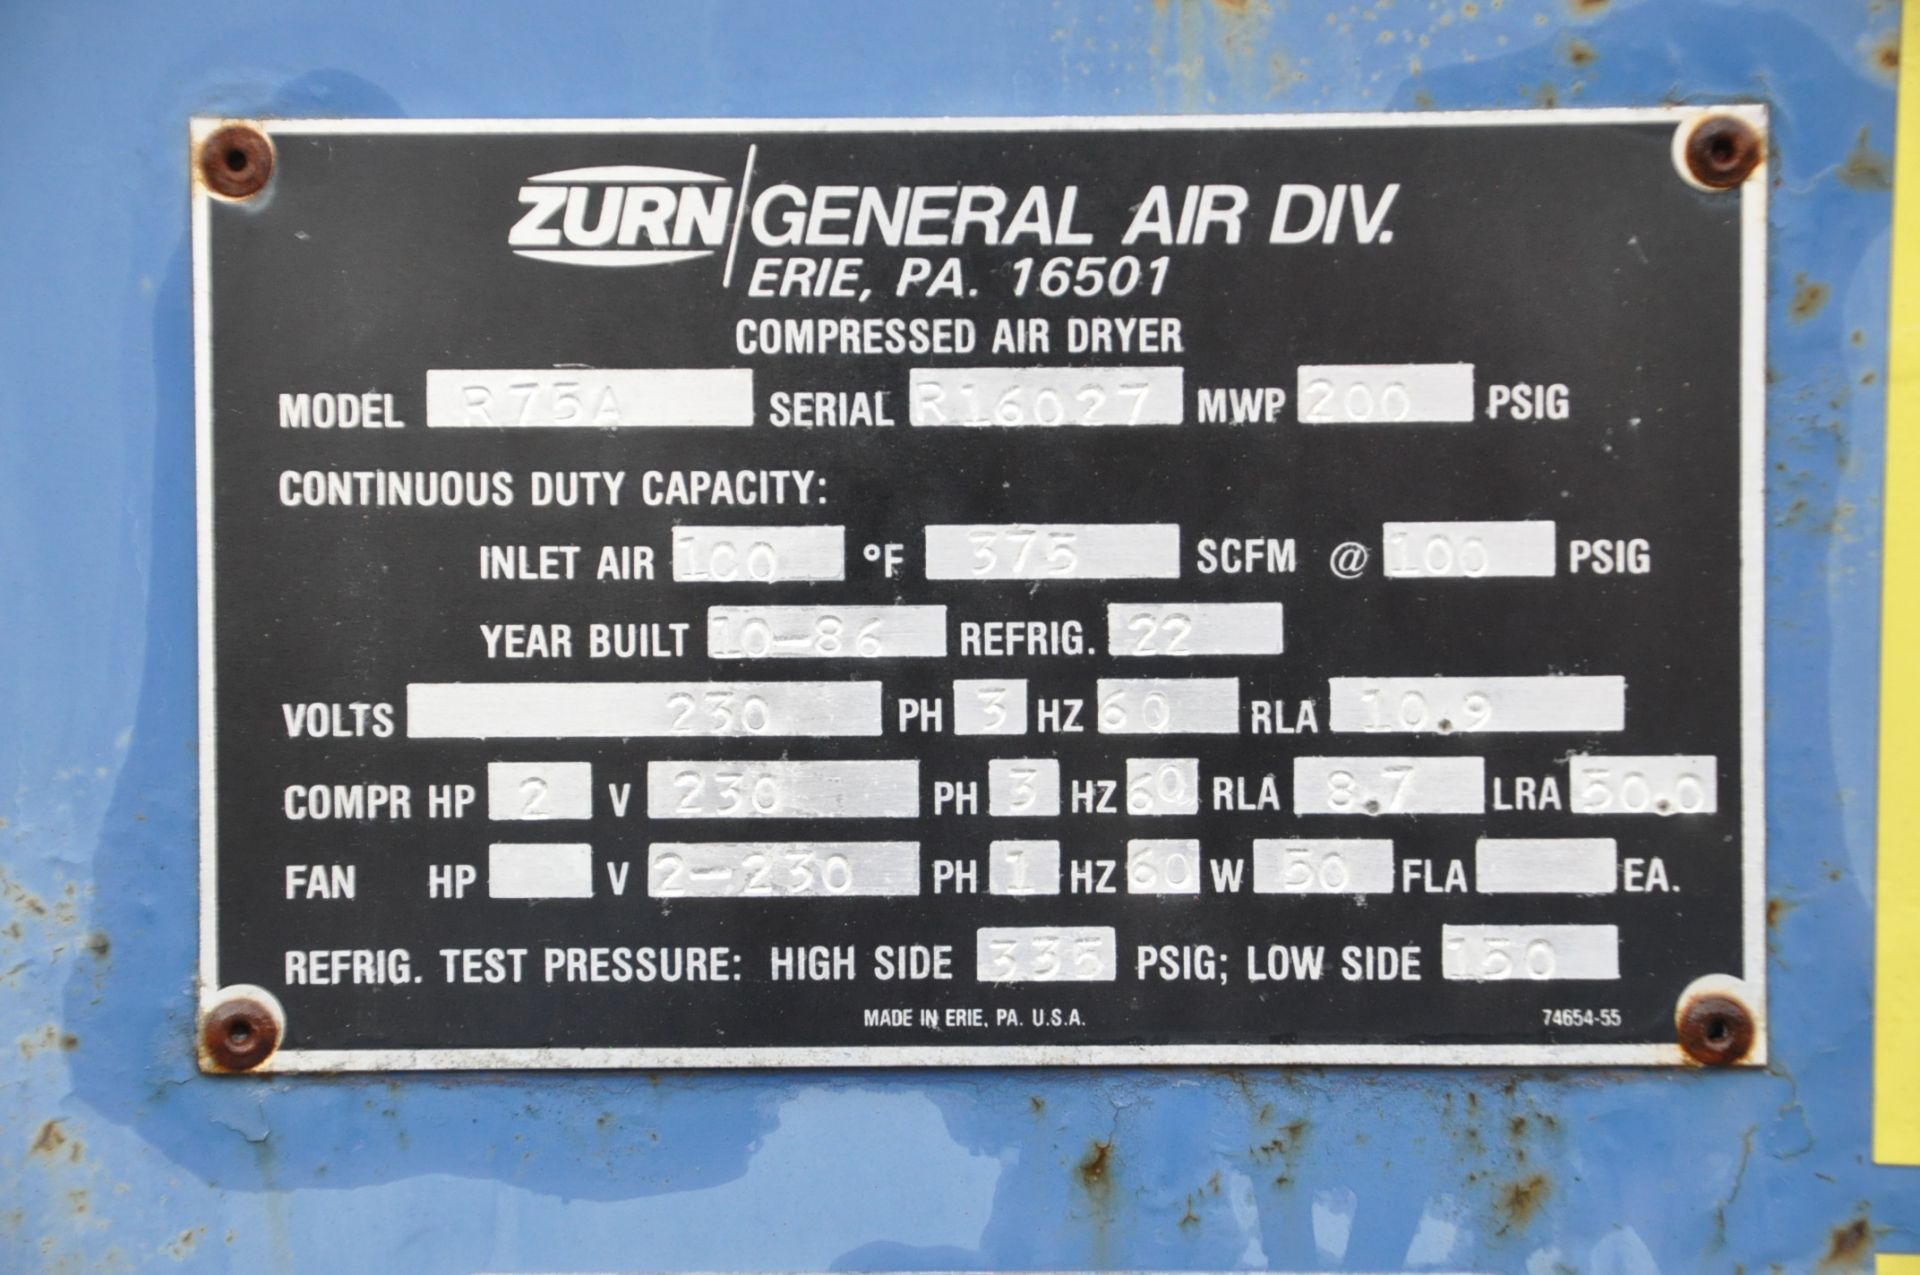 Zurn Model R75A, Compressed Air Dryer, S/n R16027 (1986), (Outside in Yard), Loading Fee $100.00 - Image 3 of 3